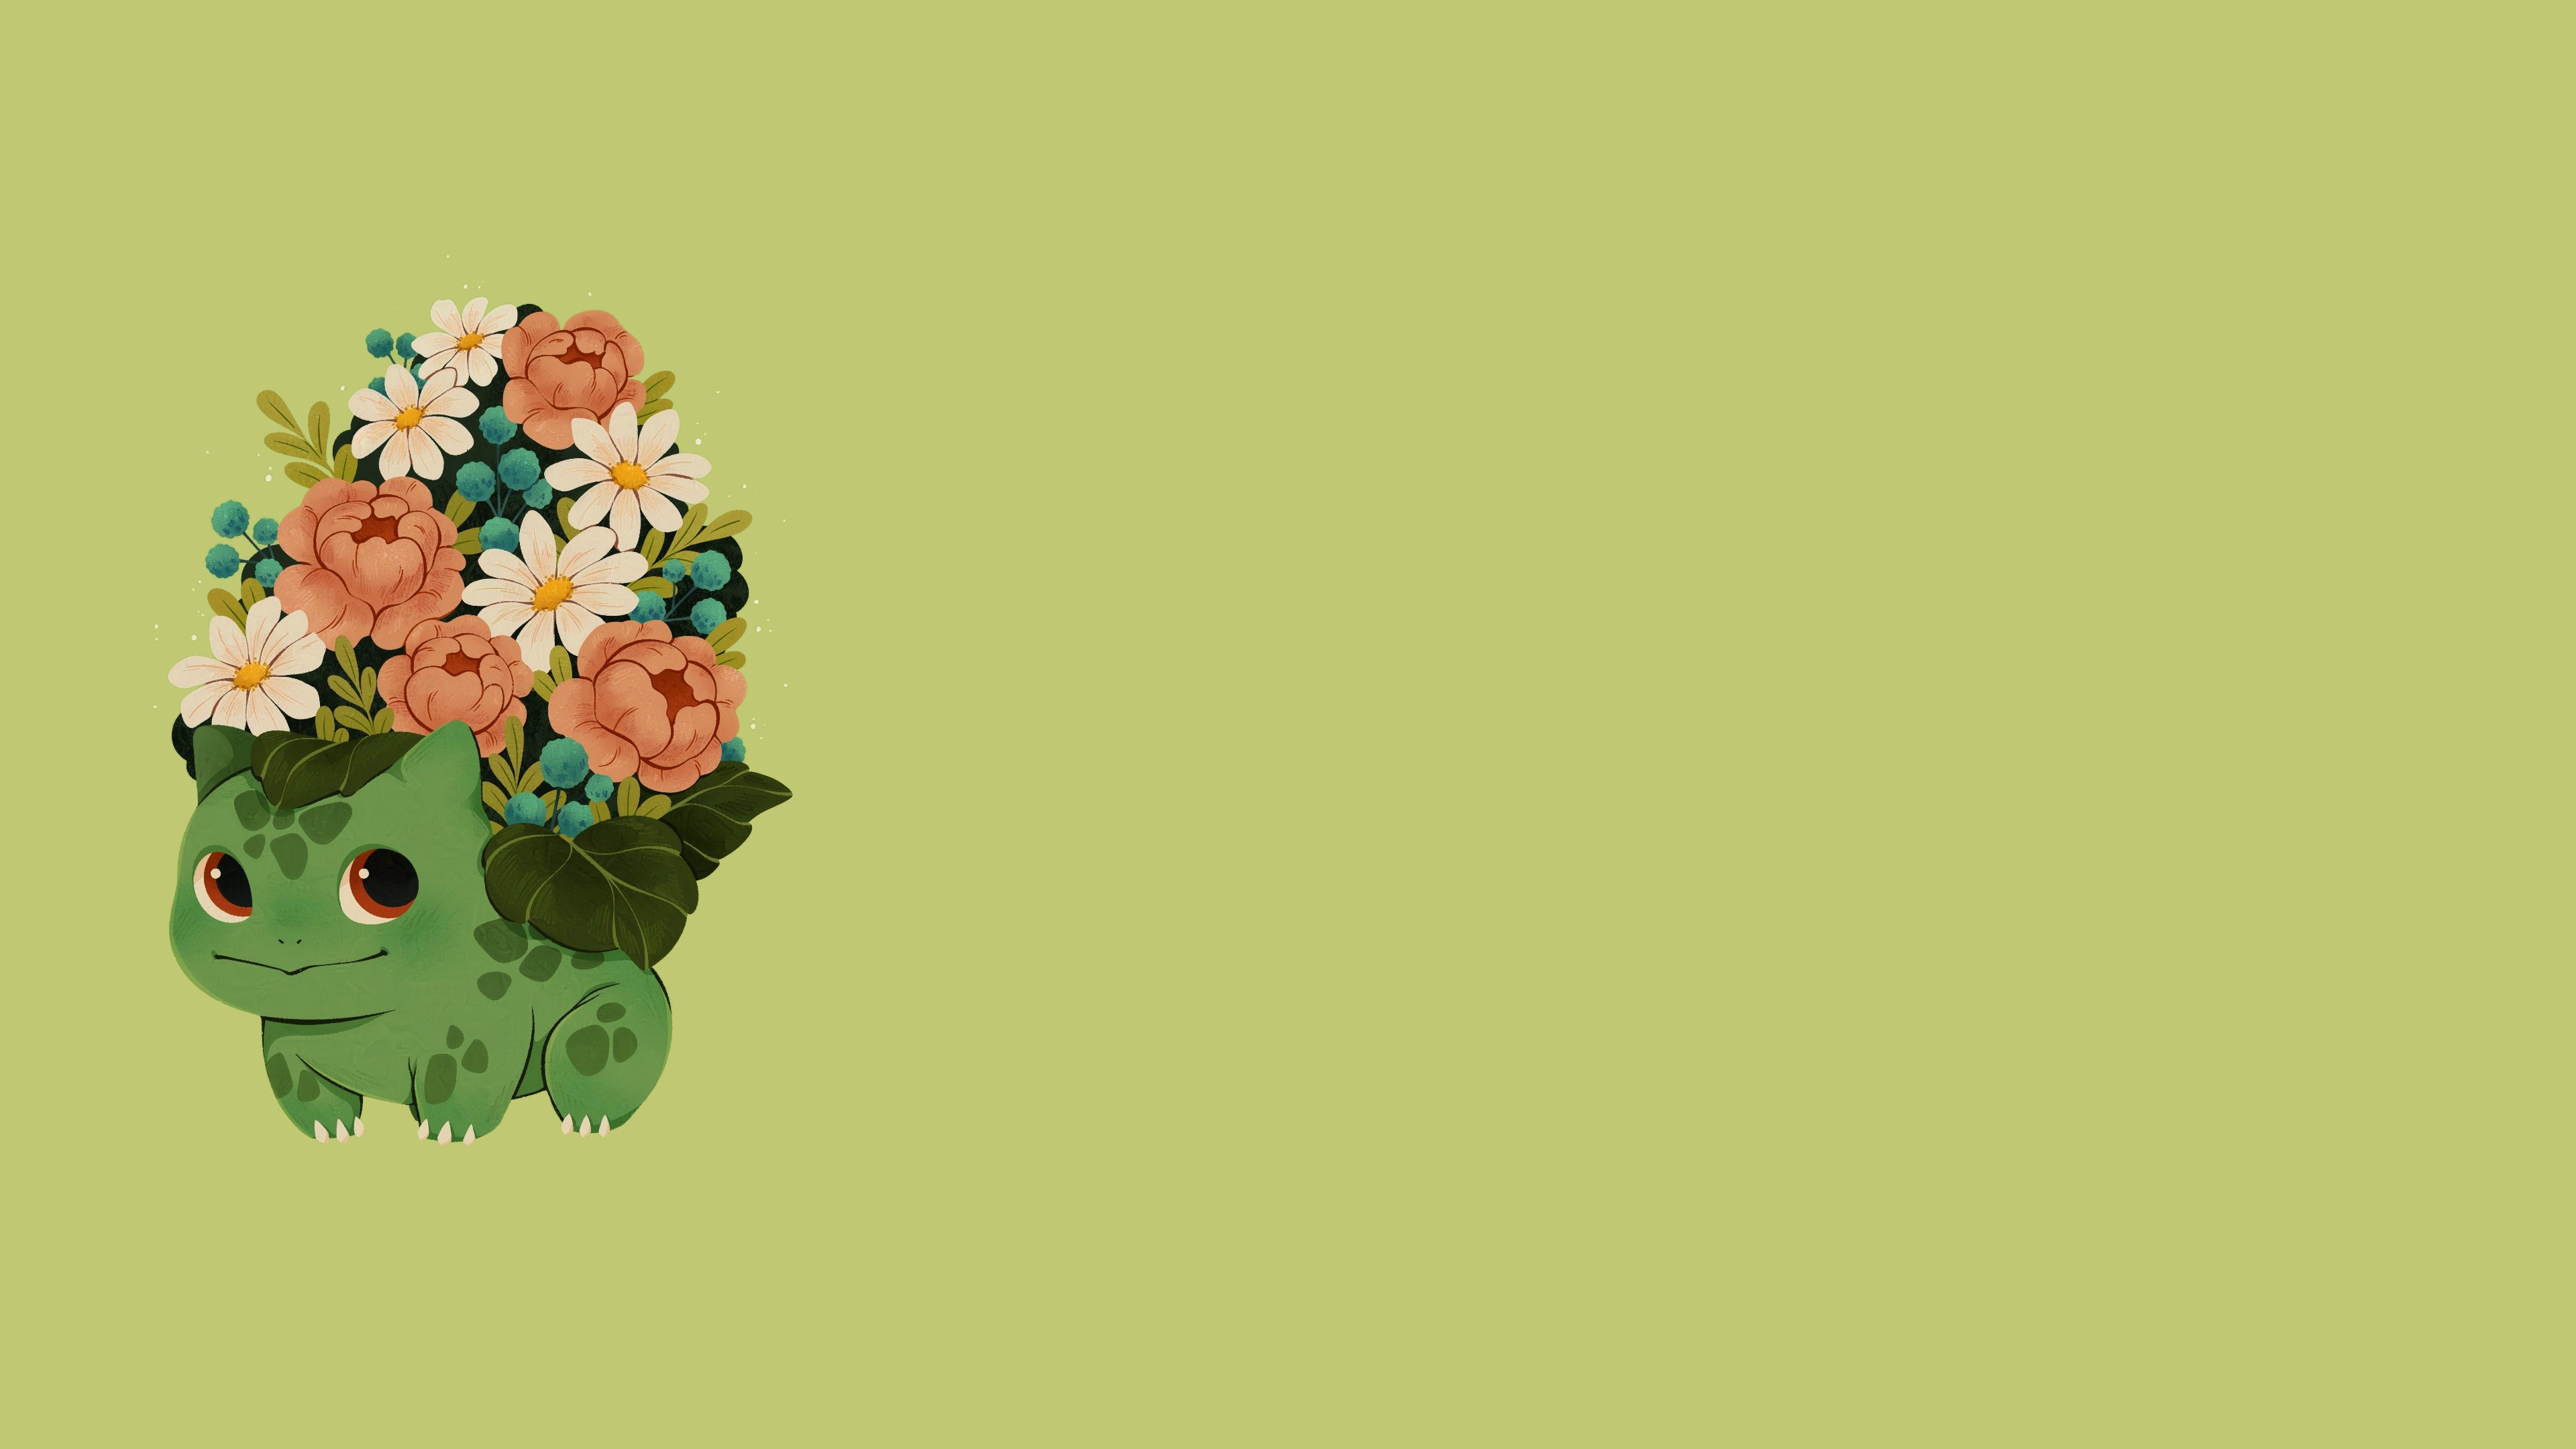 Anime 3840x2160 Bulbasaur Pokémon Pokémon First Generation pastel flowers bouquet bouquets dinosaurs reptiles leaves simple background green background anime video games Nintendo red eyes minimalism